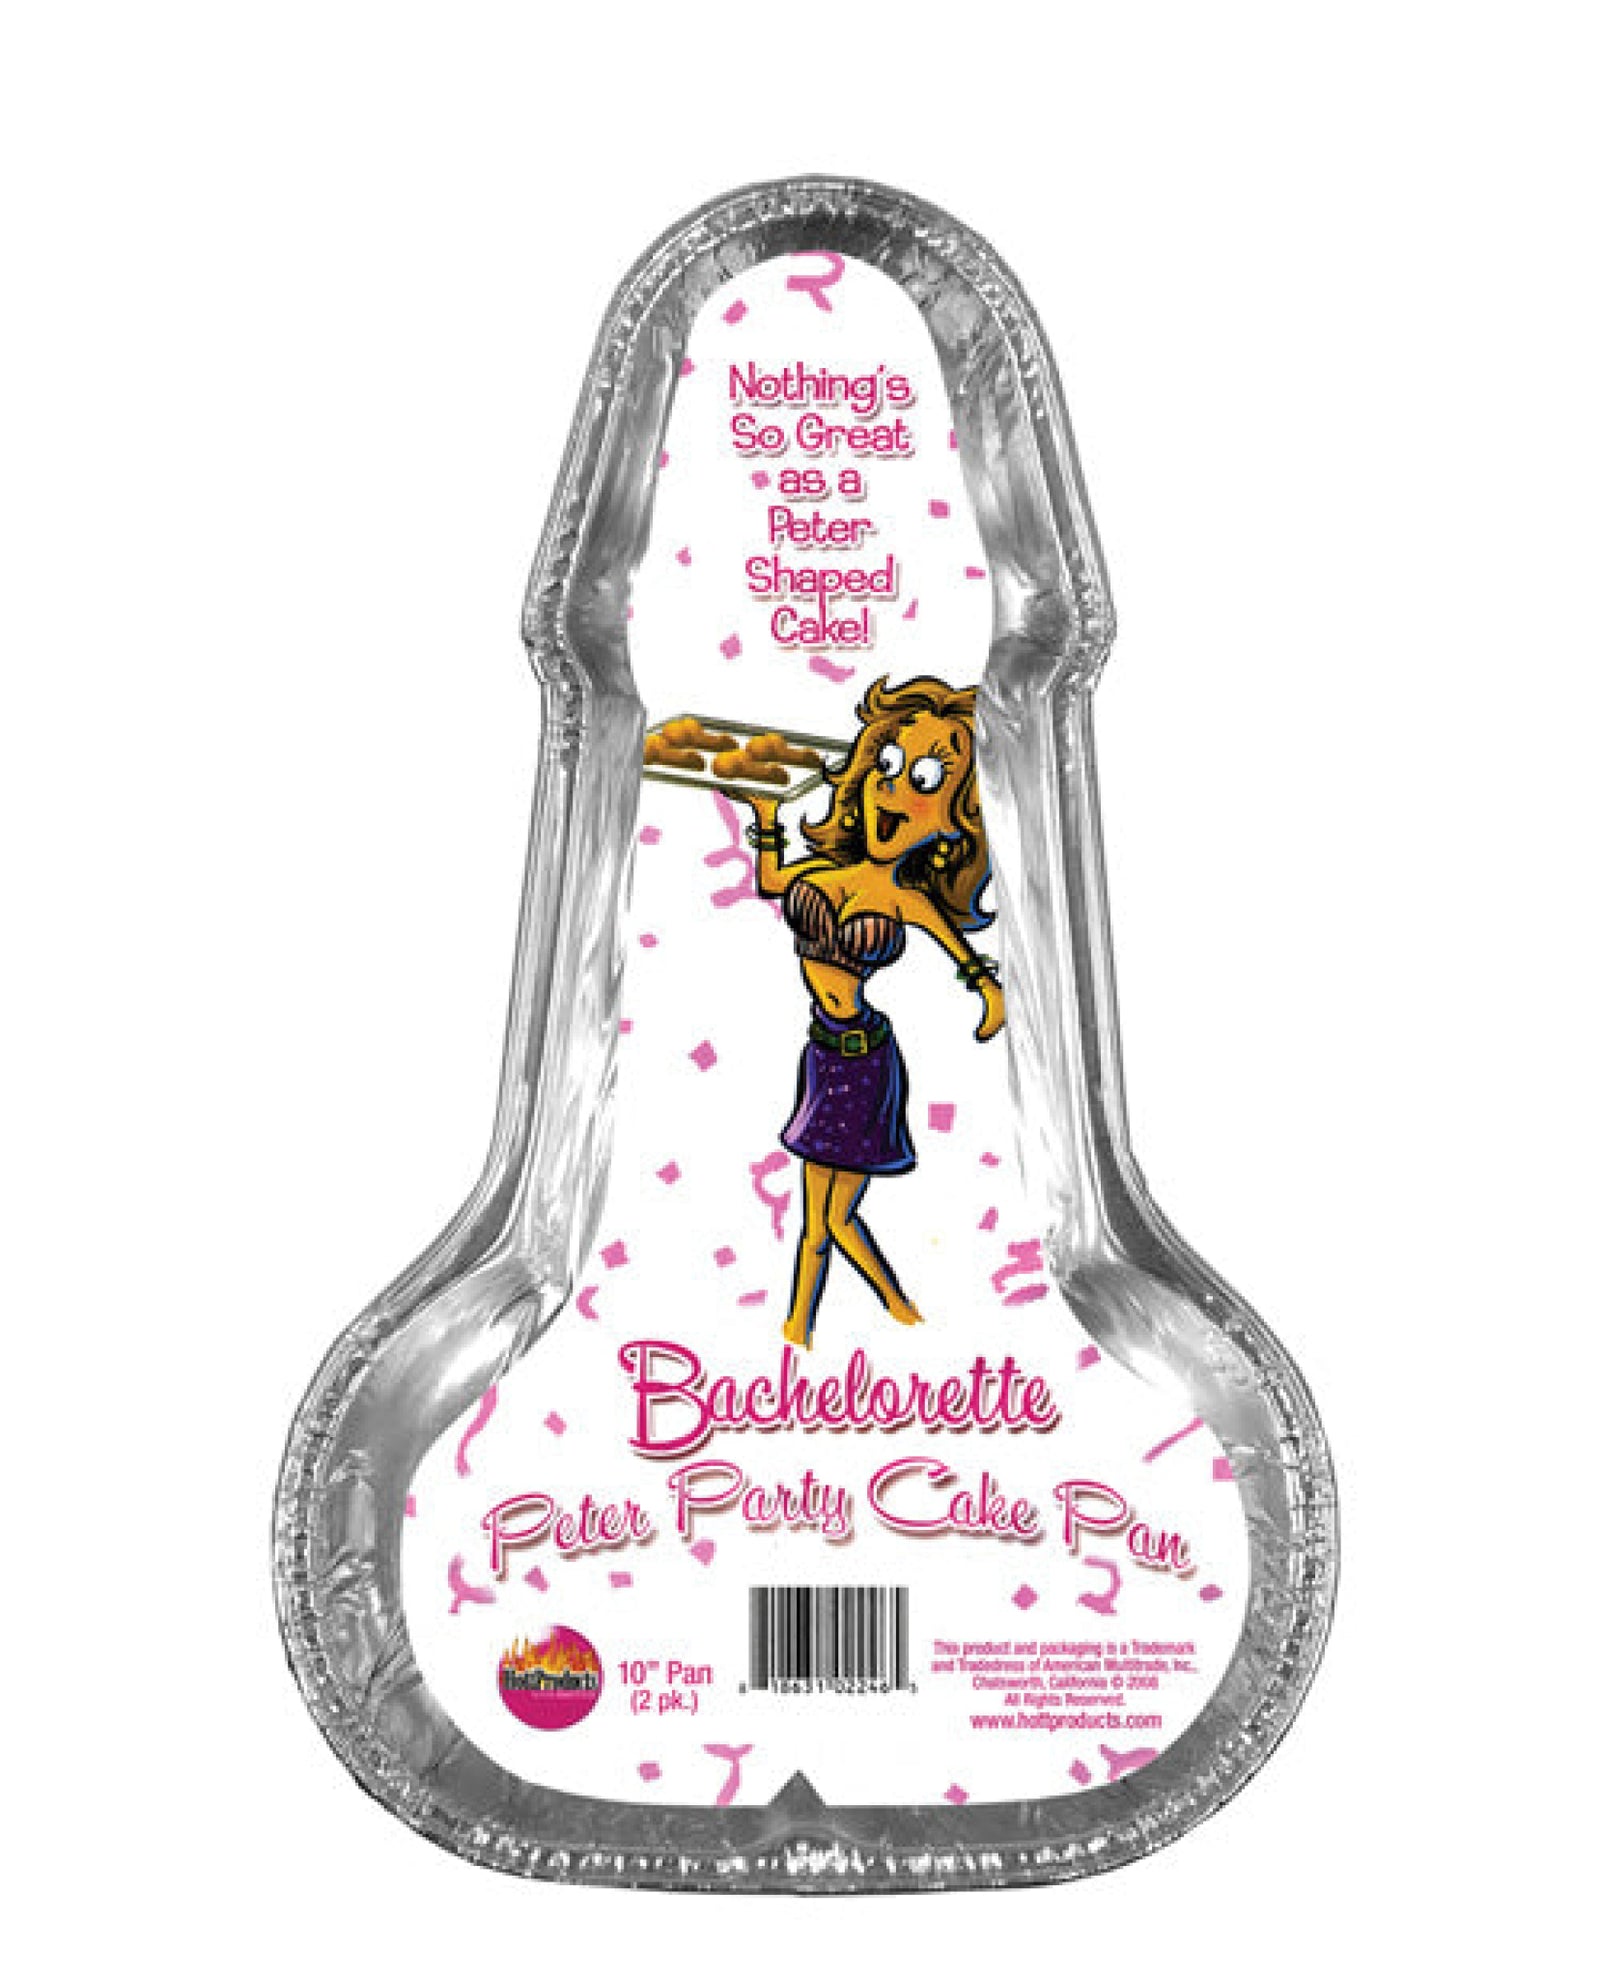 Bachelorette Disposable Peter Party Cake Pan Hott Products